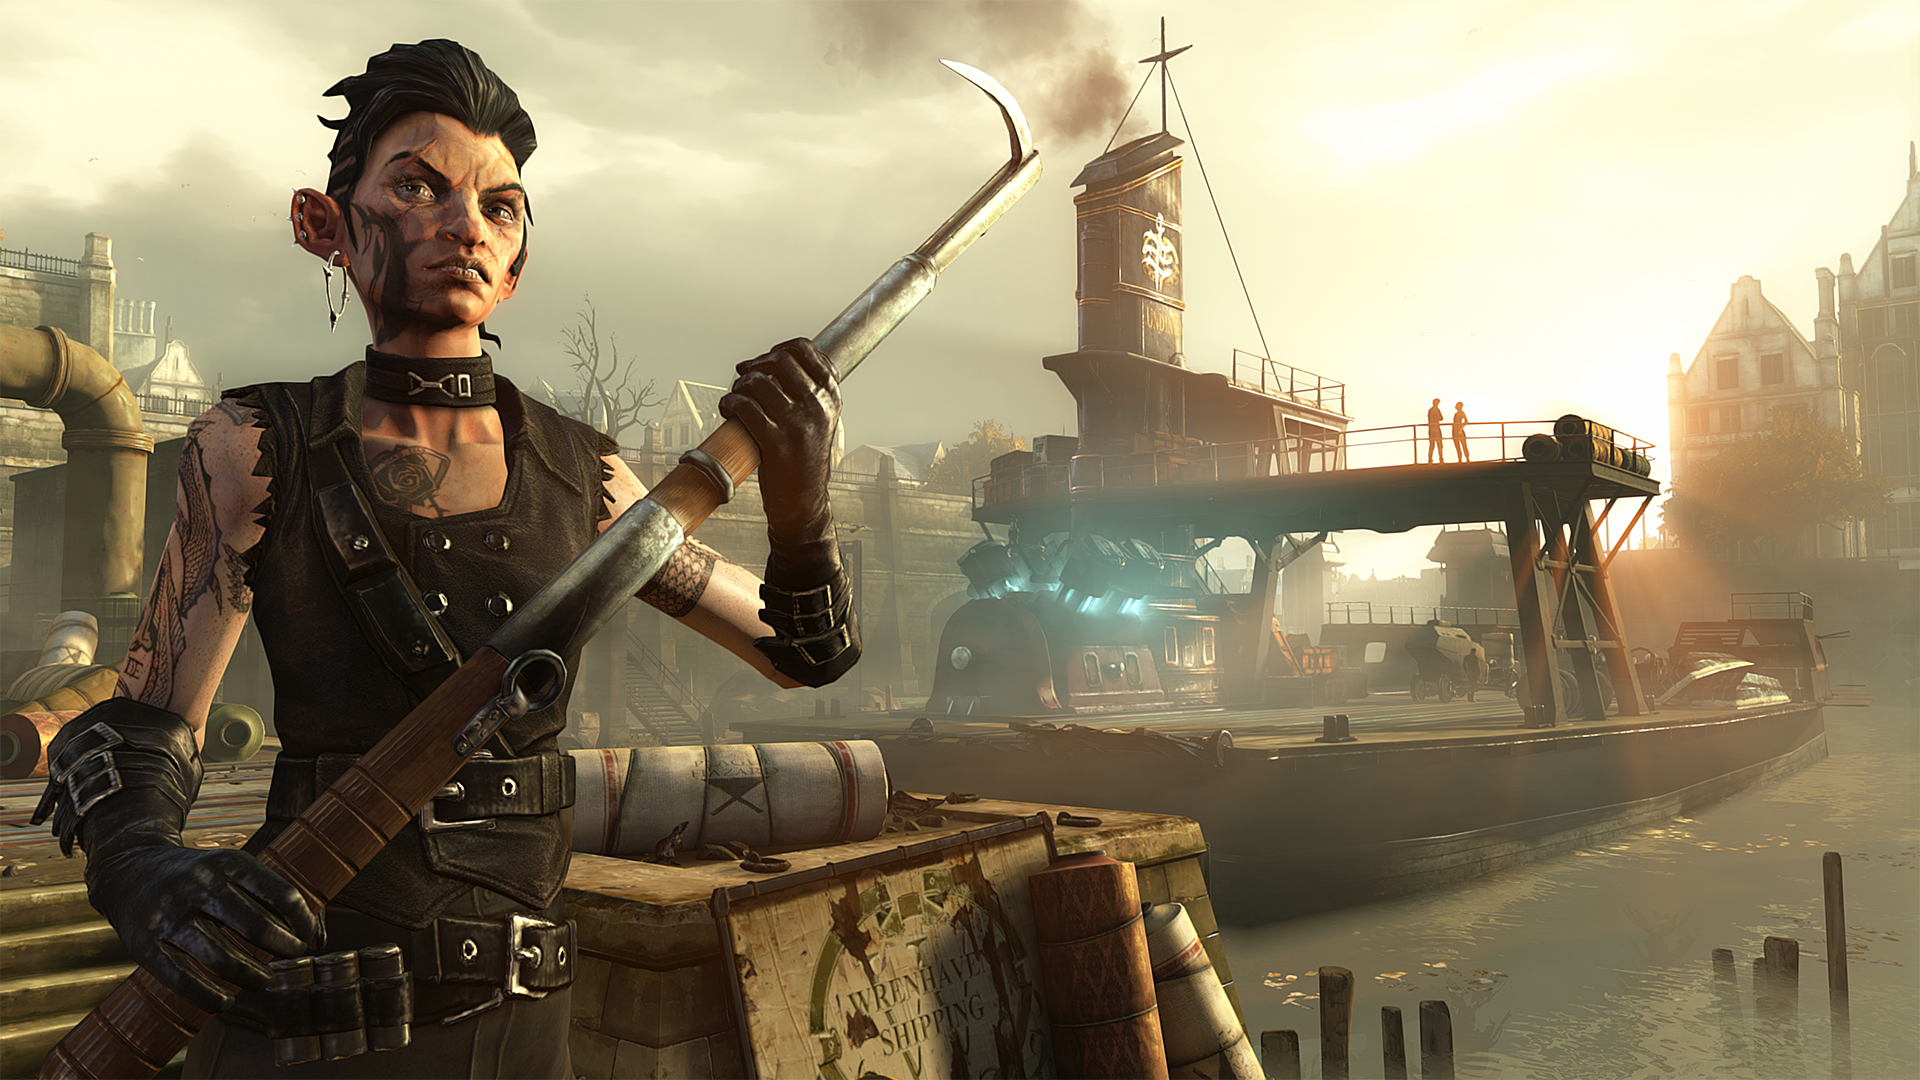 The Epic Dishonored Saga Comes To A Close On August 13